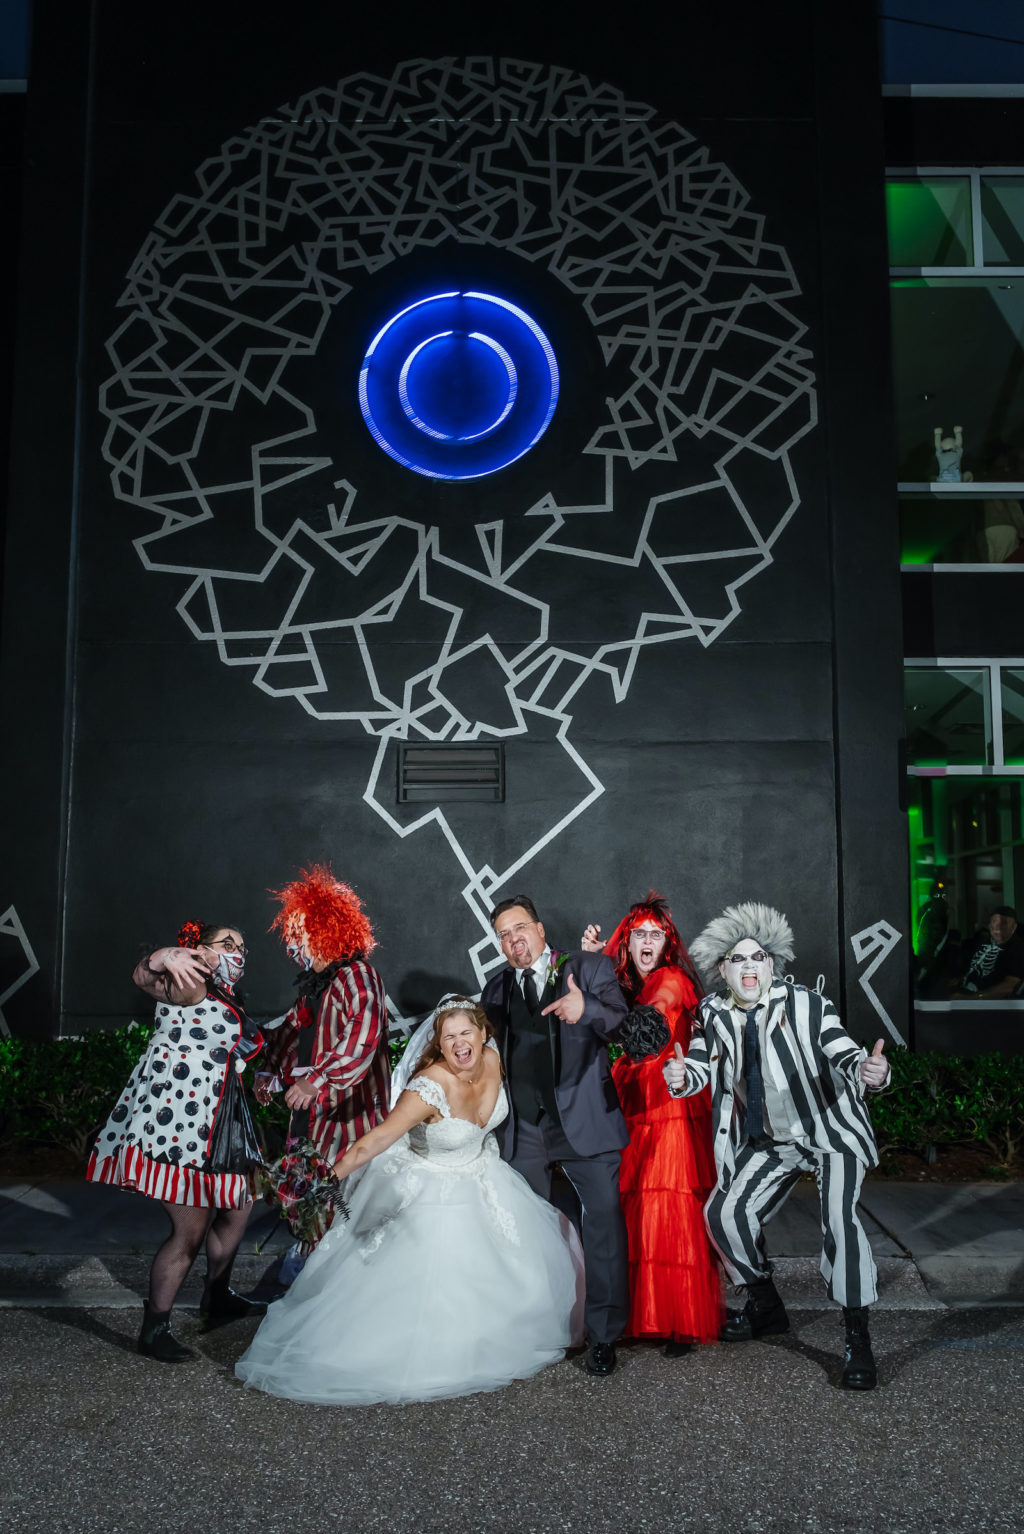 Halloween Wedding Bride and Groom and Guests in Costumes Outside Black Whimsical Wall Mural in Downtown St. Pete